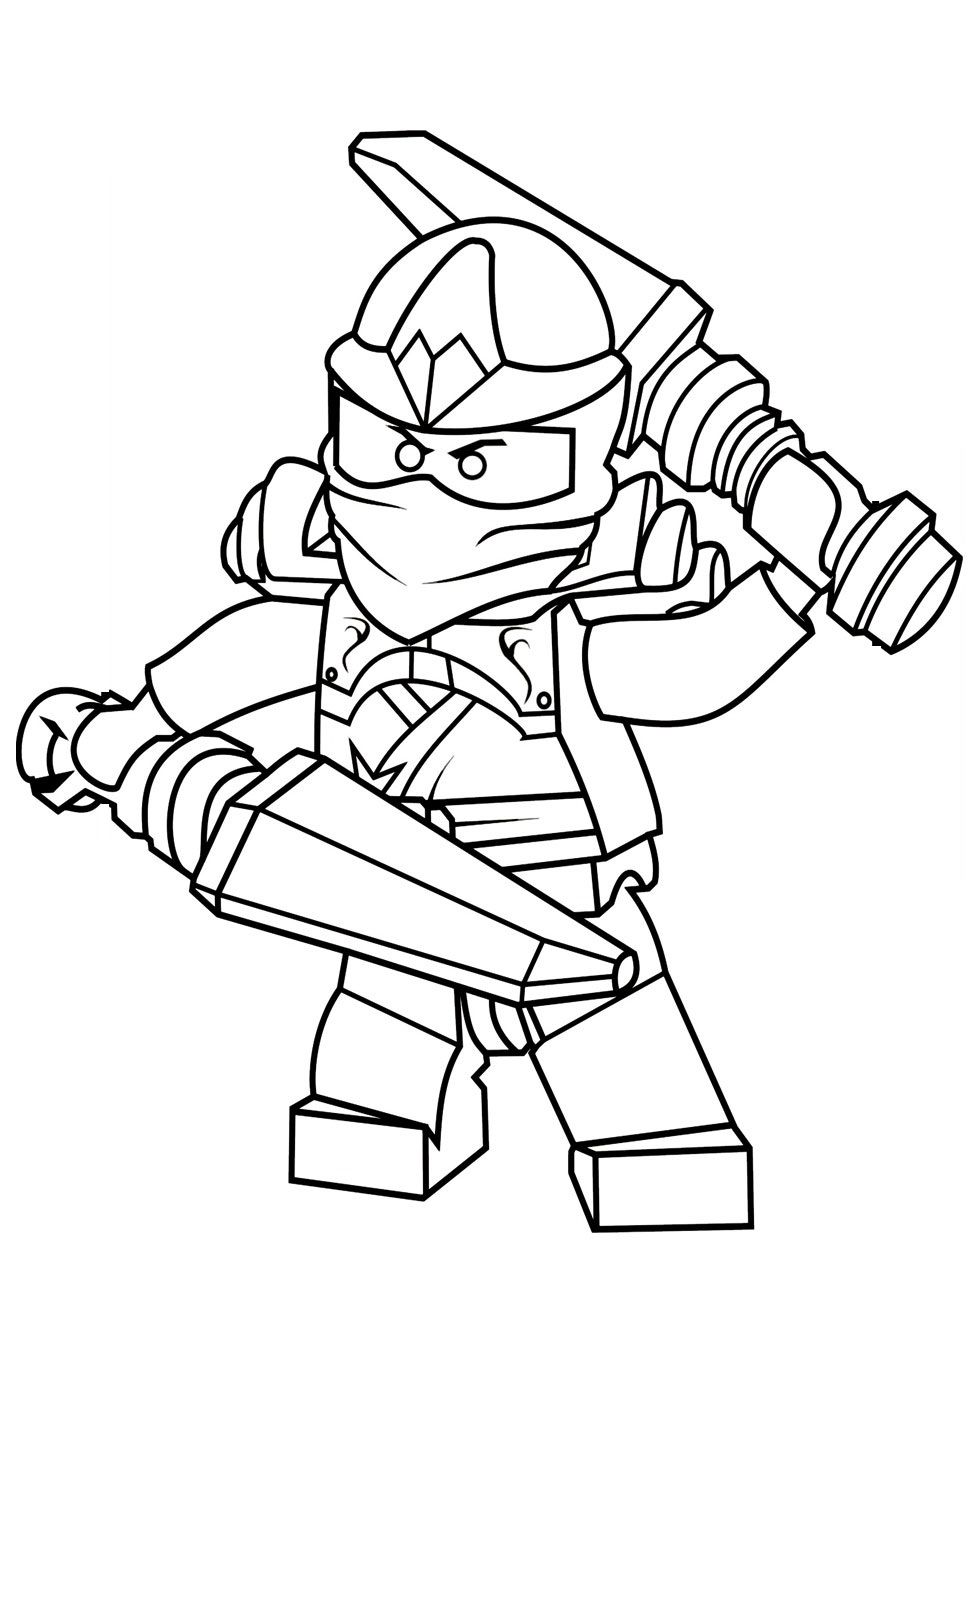 Free printable ninjago coloring pages for kids ninjago coloring pages lego movie coloring pages lego coloring